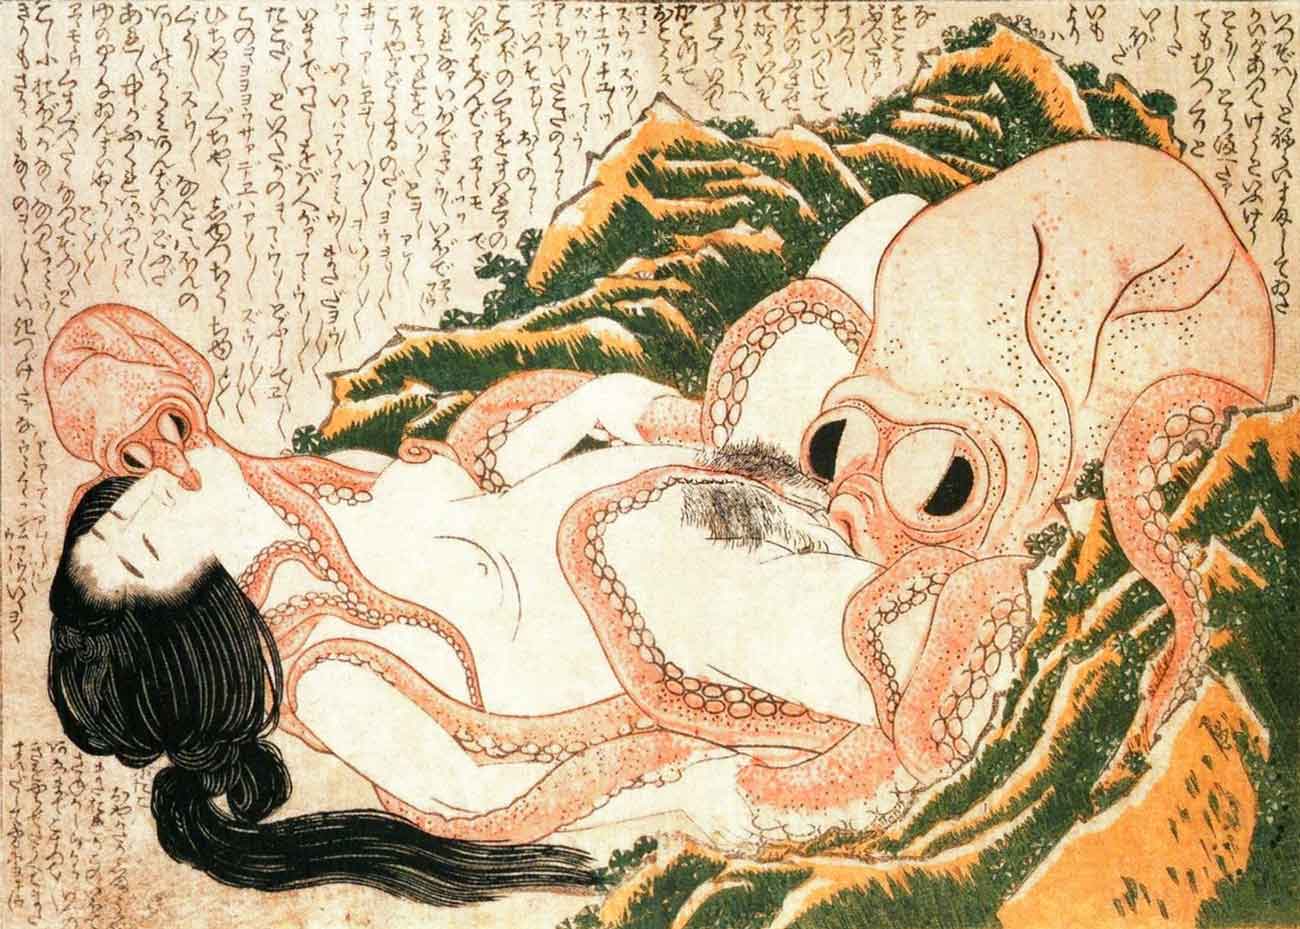 Shunga: 3 Essential Things to Know About Japanese Erotic Prints